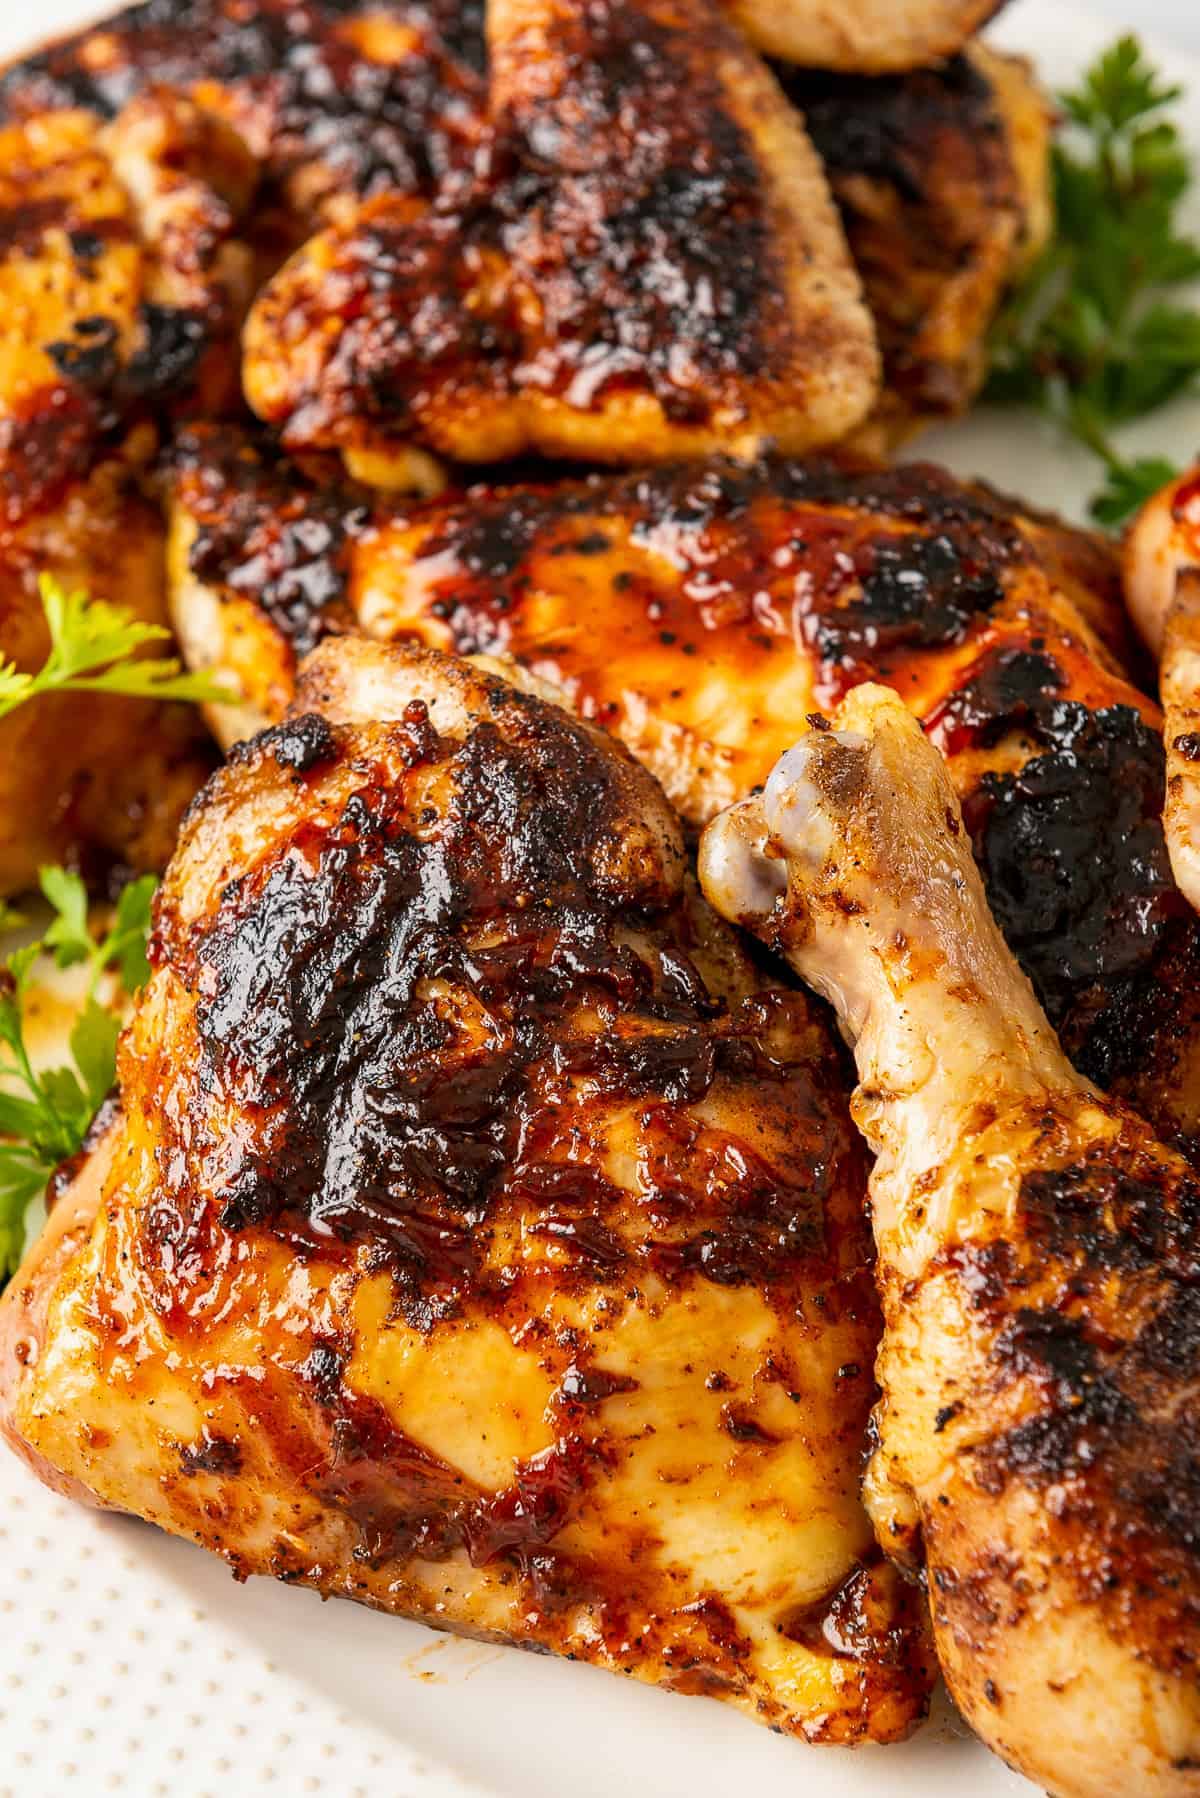 How To Make Bbq Chicken On The Grill